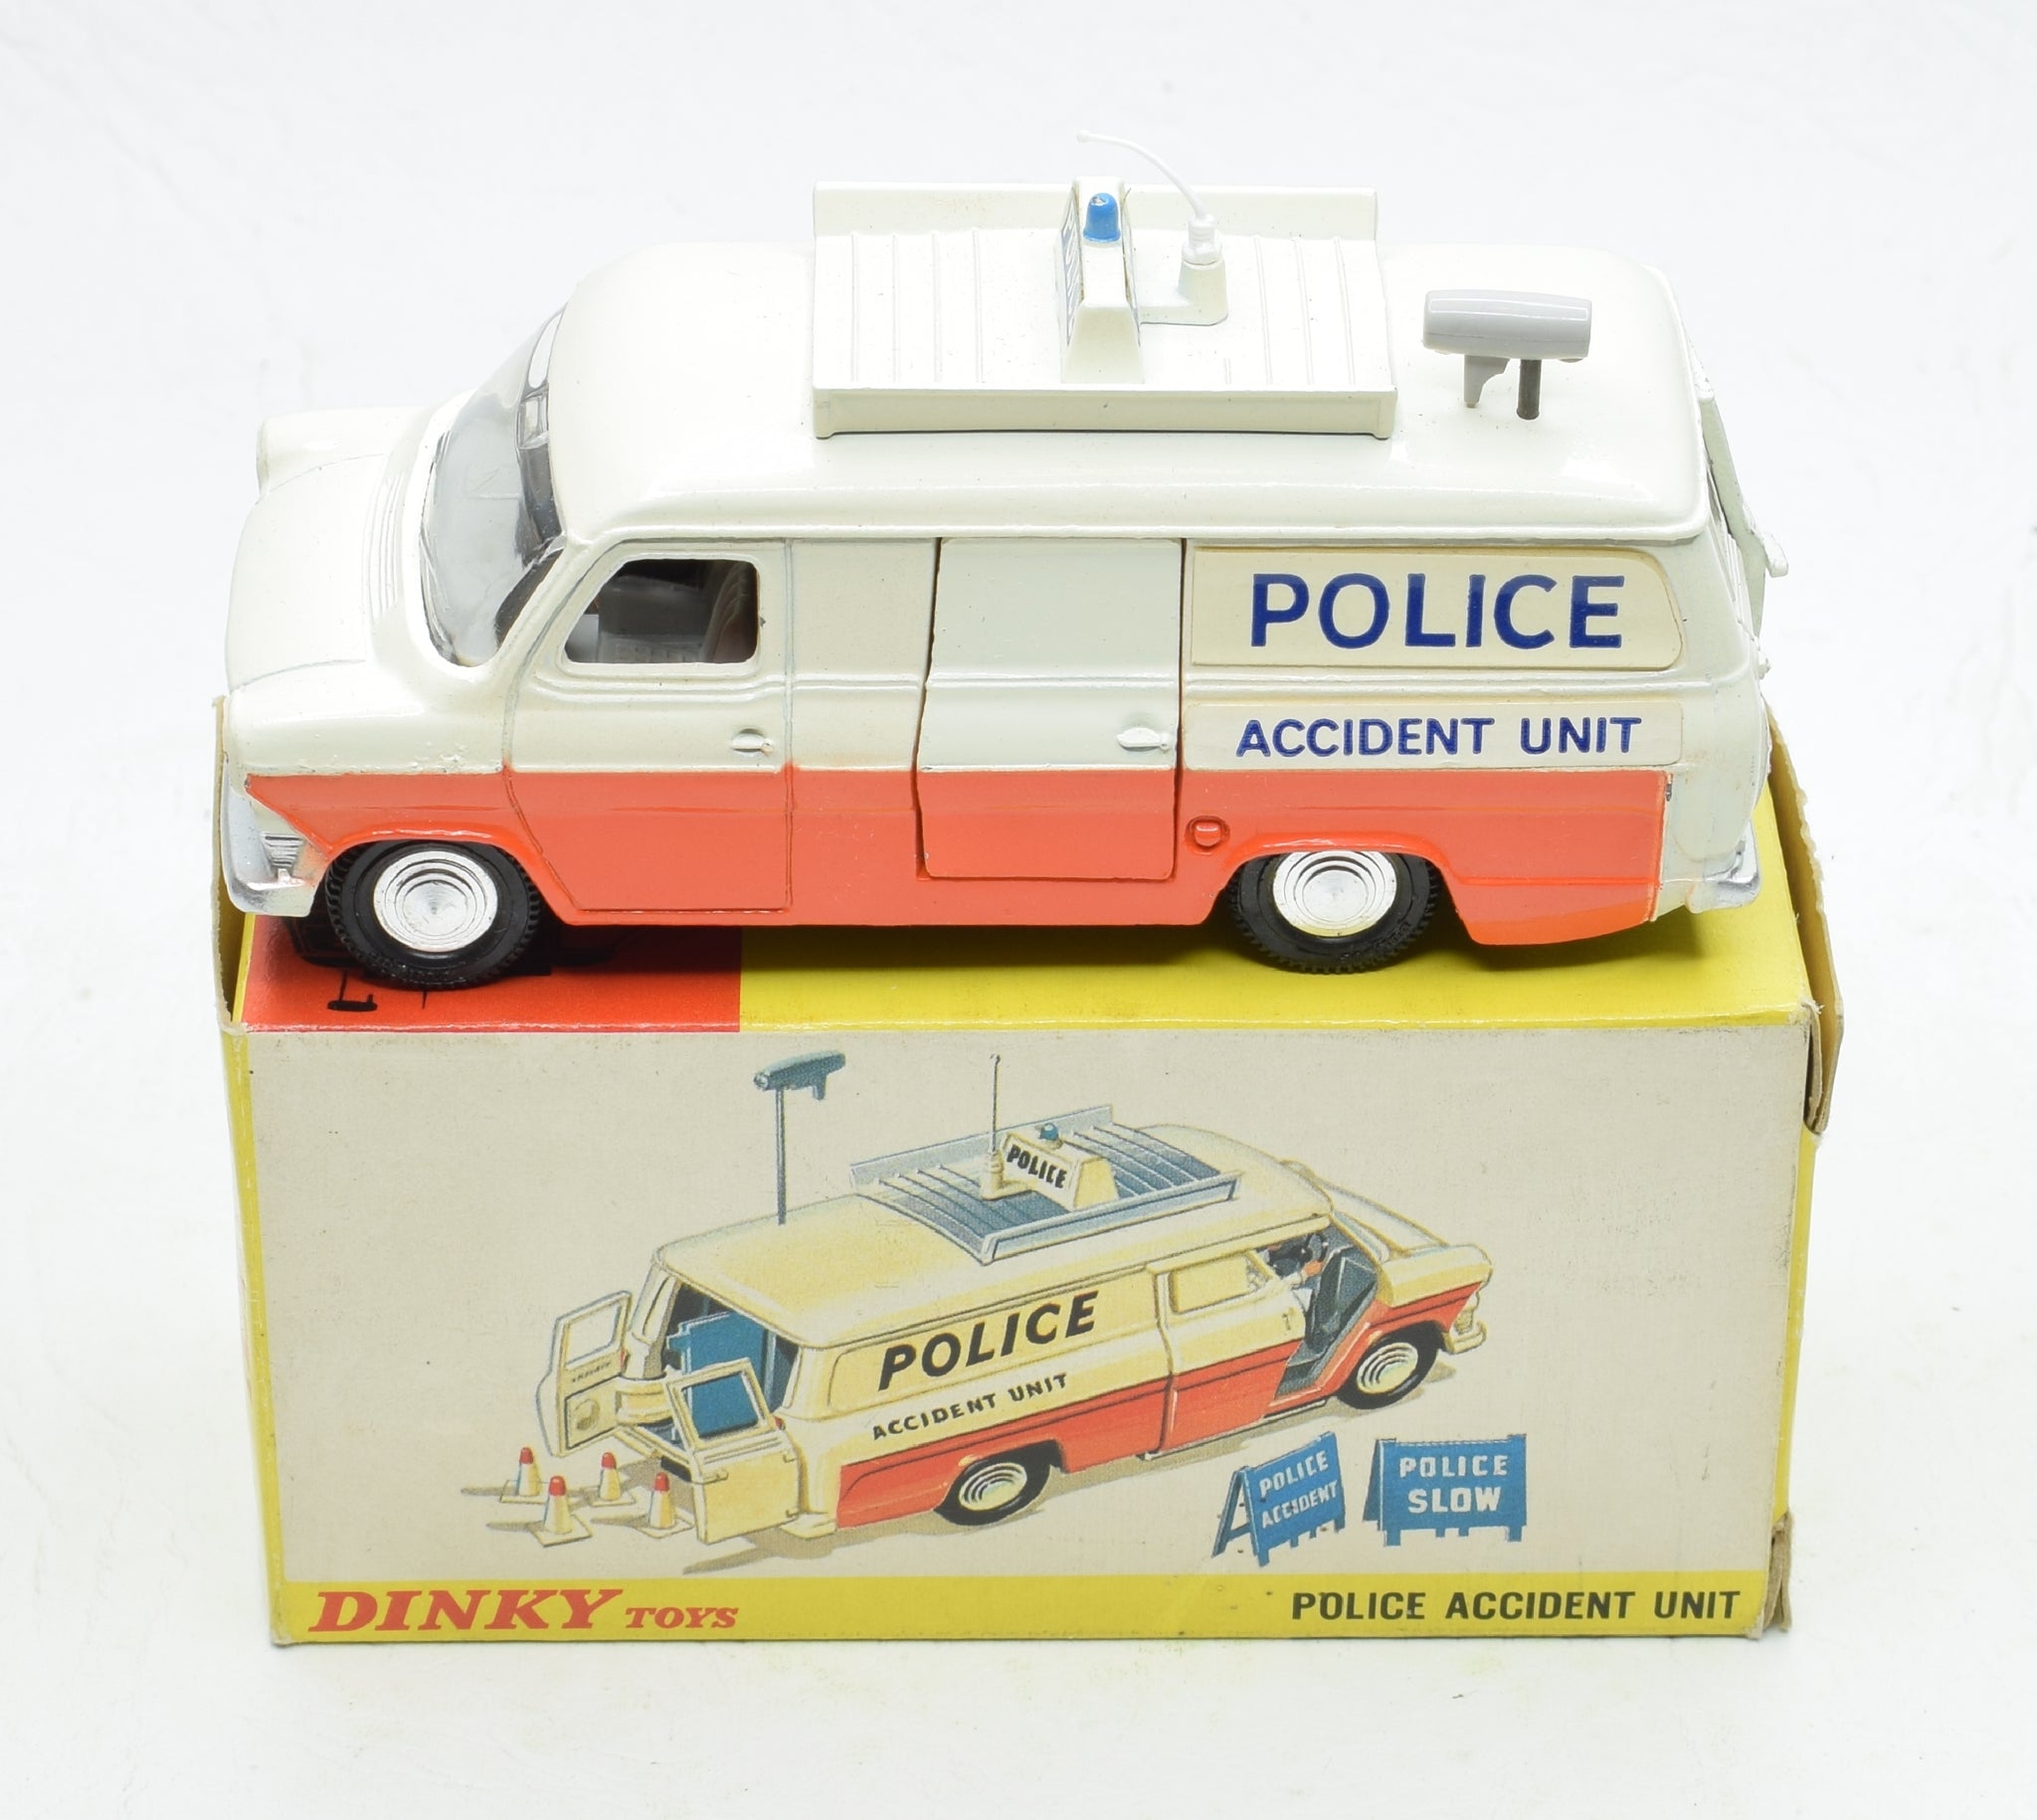 DINKY TOYS [287] Police Accident Unit | givingbackpodcast.com